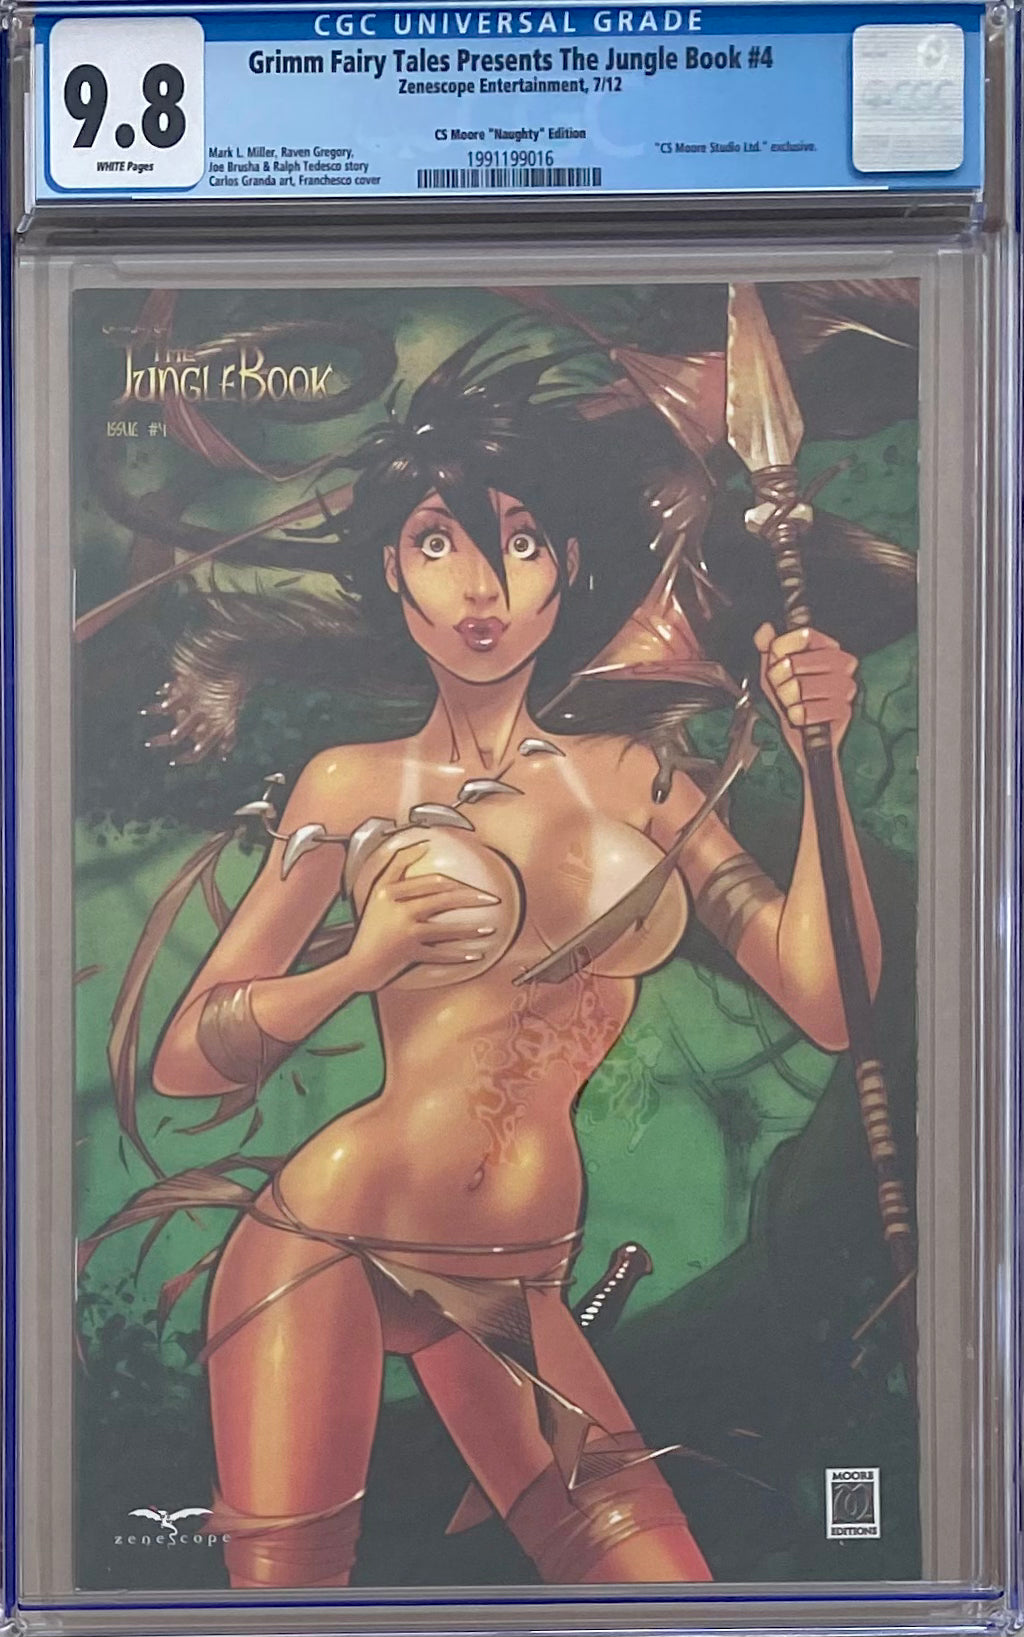 Grimm Fairy Tales Presents The Jungle Book #4 CS Moore "Naughty" Edition CGC 9.8